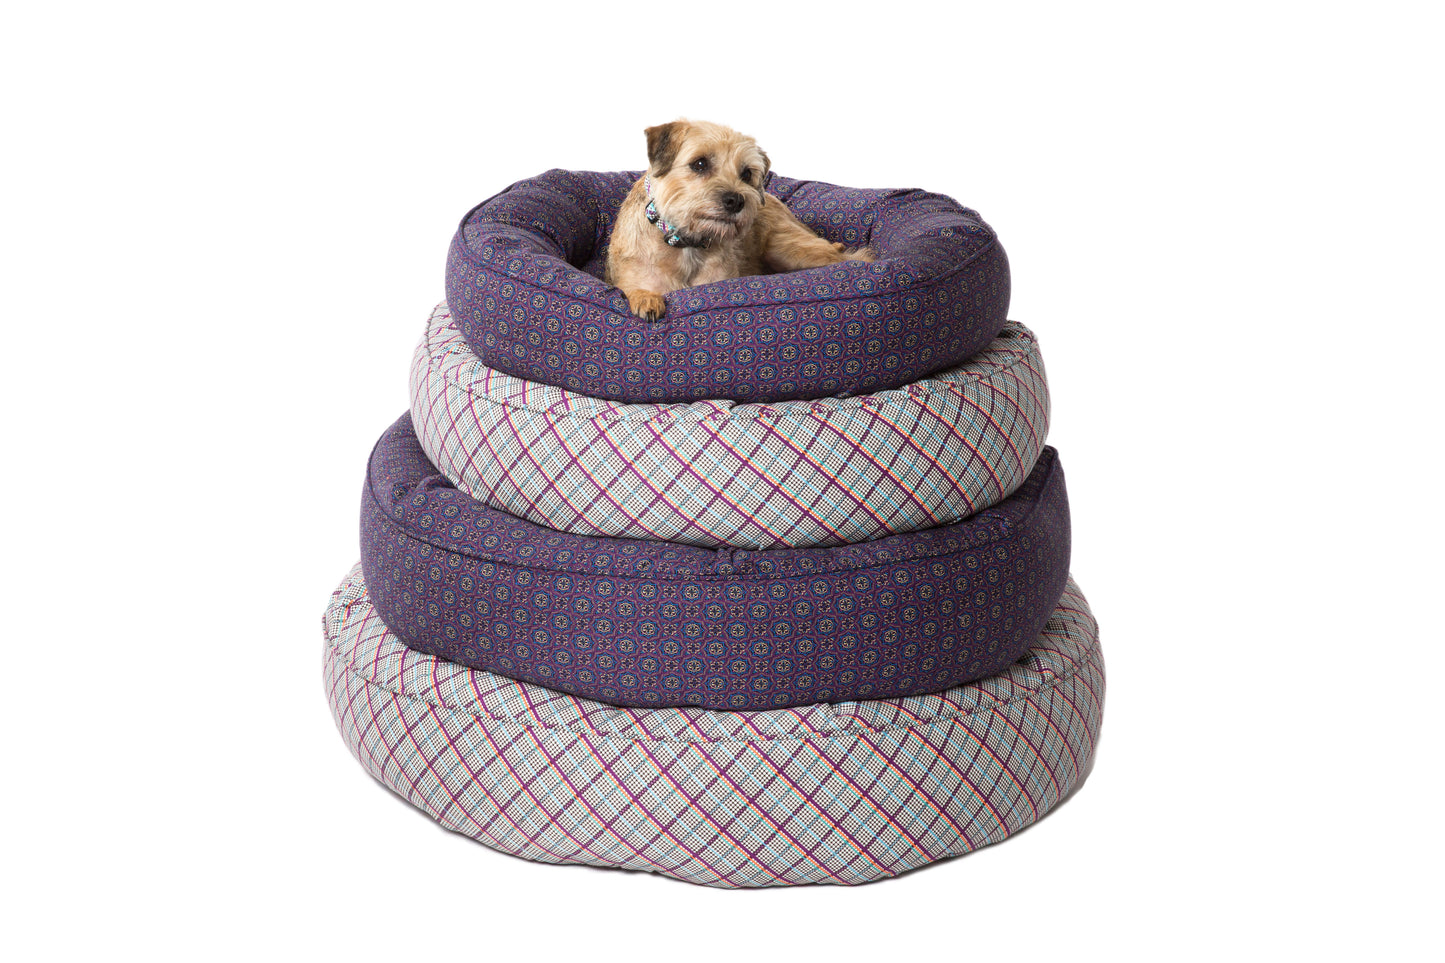 Canine Styles - San Marco Purple - Milano Plaid - 2 Color Options - Dog Beds